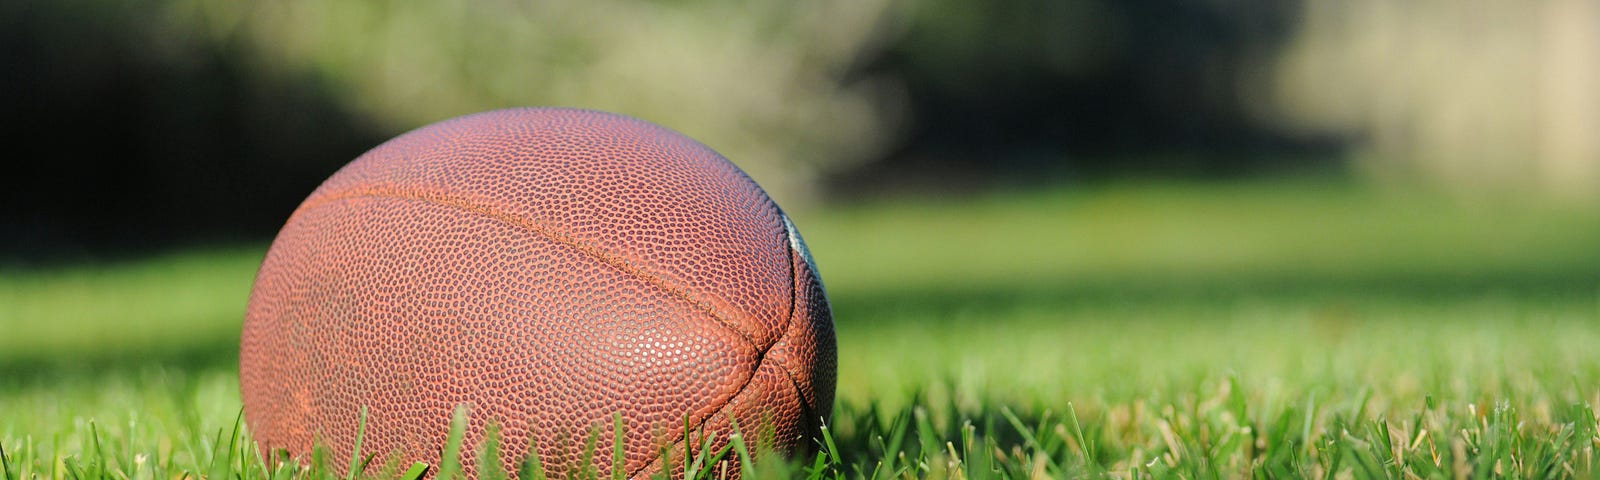 A football sits on the grass.